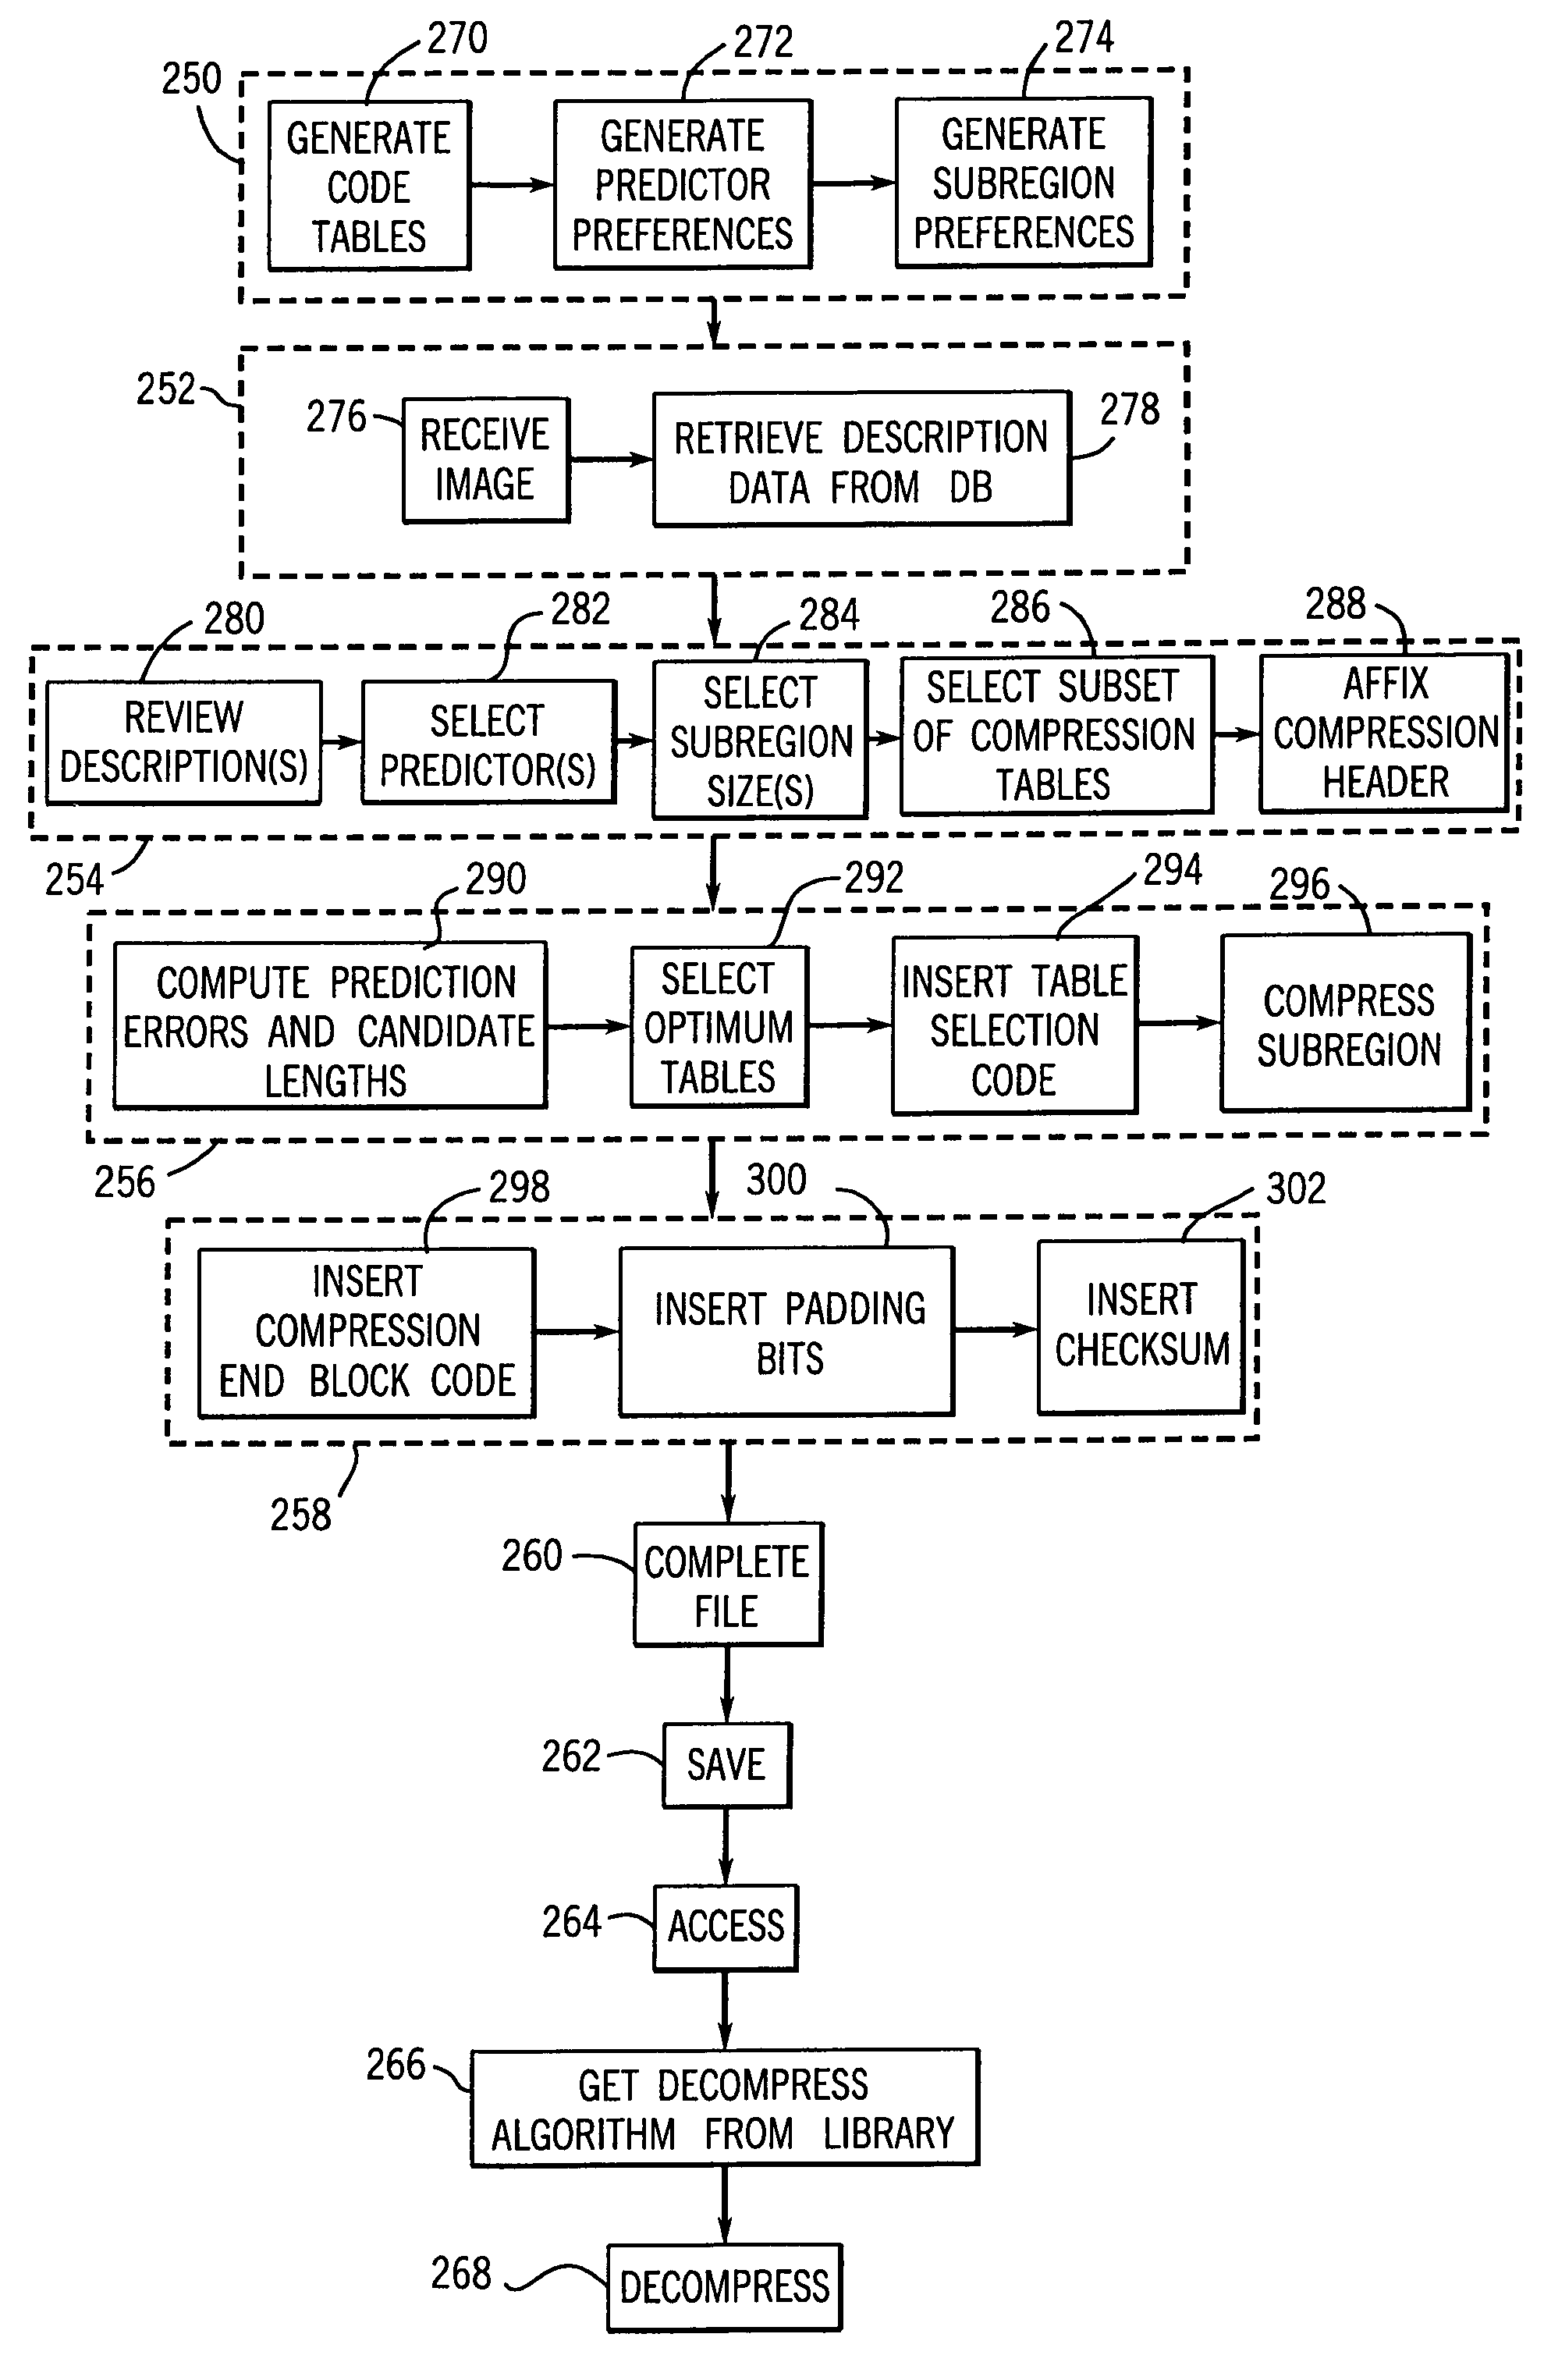 Image data compression employing multiple compression code tables